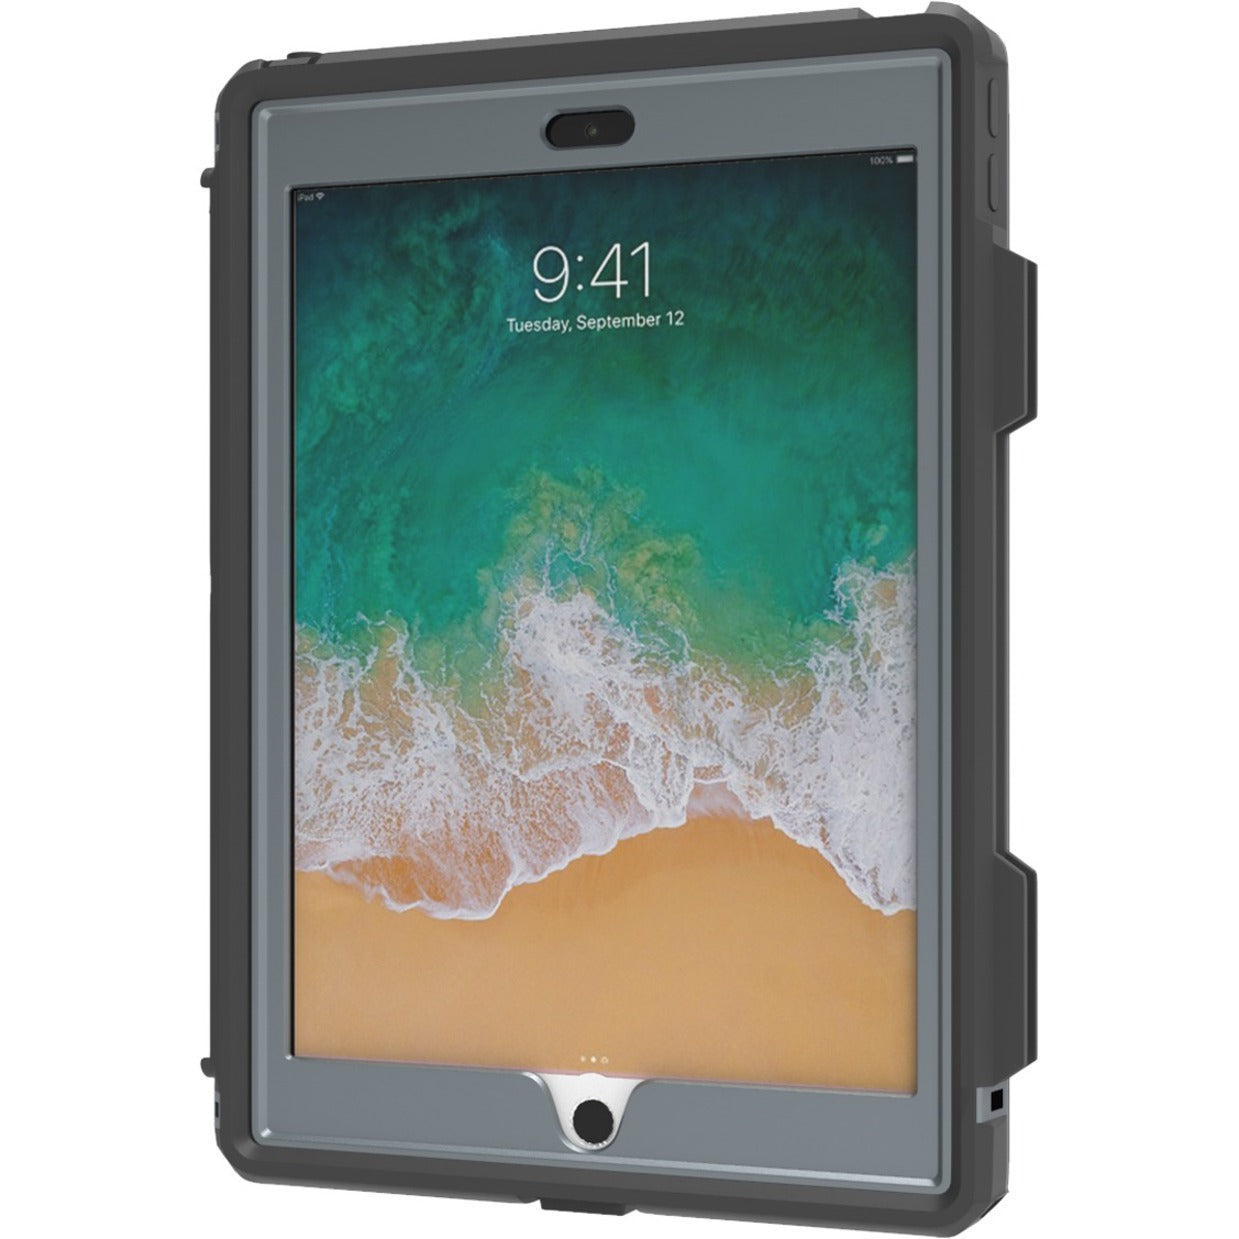 MAXCases Shield Extreme-H Rugged Underwater Case for 10.2" Apple iPad (7th Generation) iPad (8th Generation) Tablet - Black